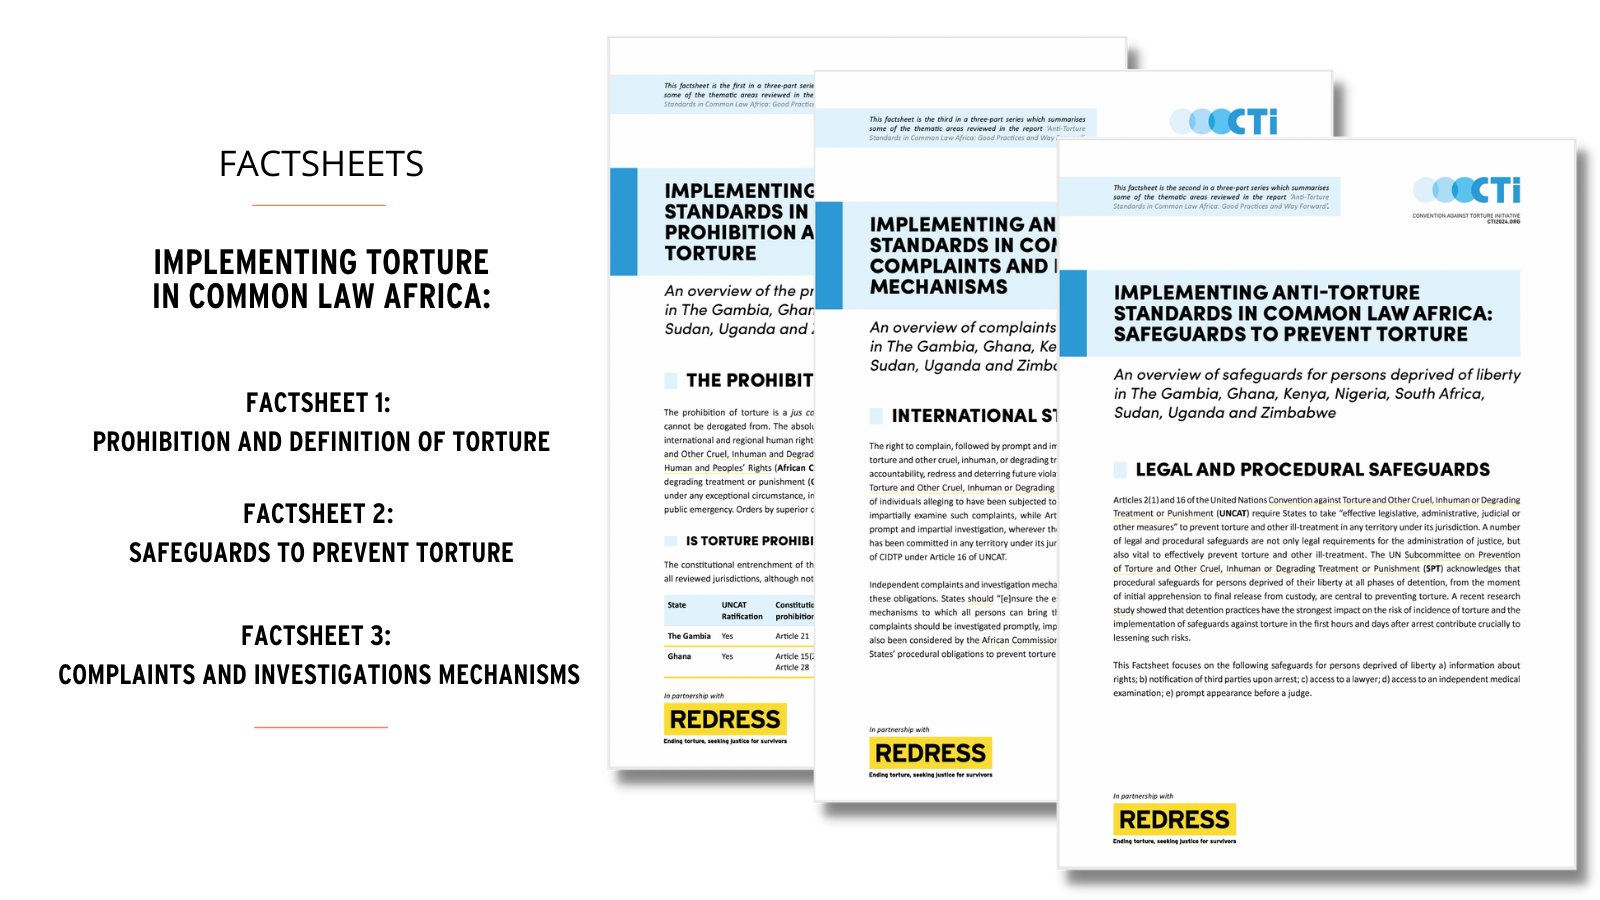 Anti-Torture Standards in Common Law Africa: Quick Facts